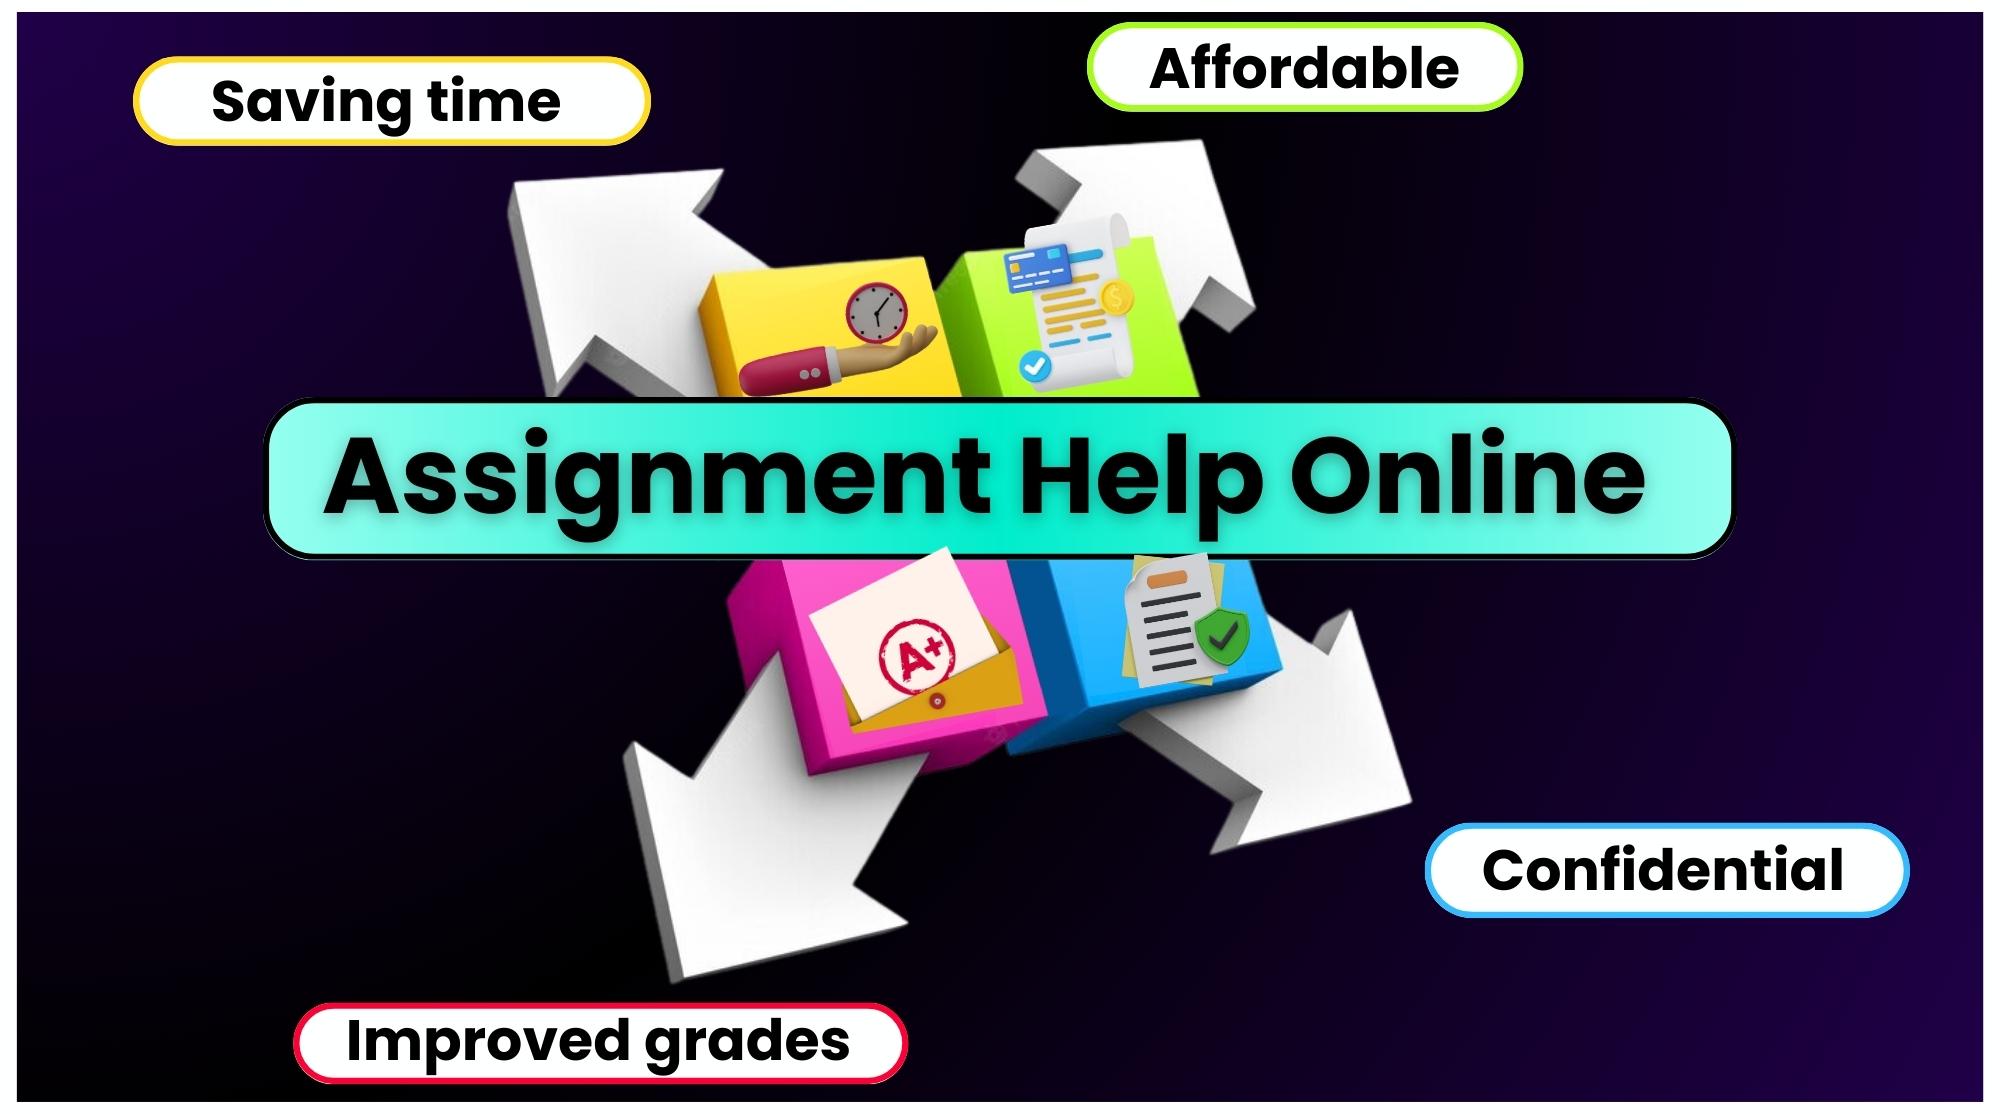 Assignment Help Online - Affordable - Save Time - Improve Grades - Confidential